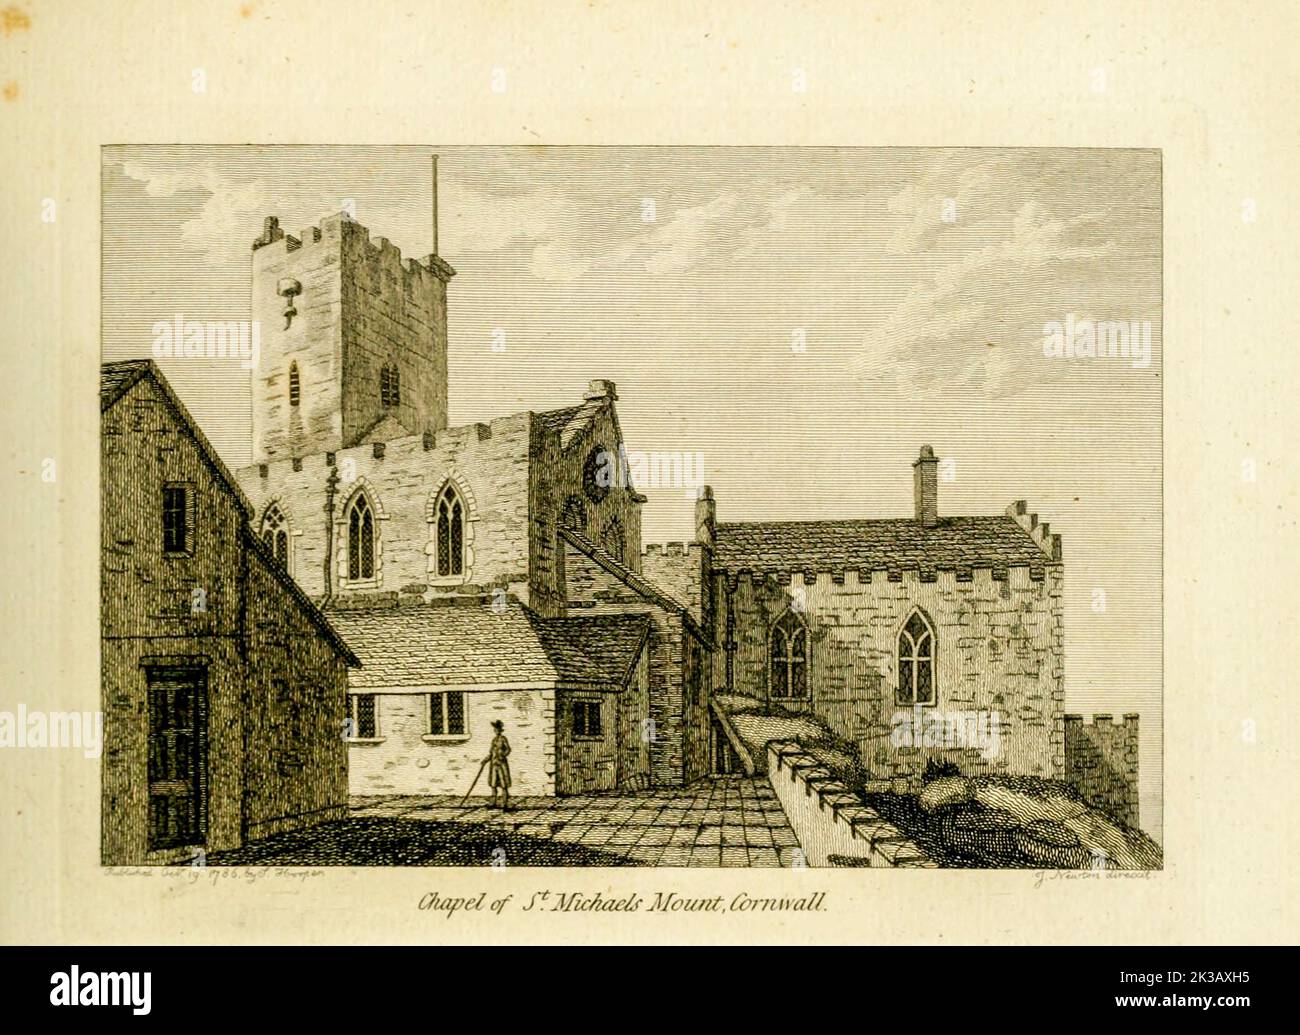 Chapel of St Michael's Mount is a tidal island in Mount's Bay, Cornwall, England, United Kingdom. from the book ' Supplement to the antiquities of England and Wales ' by Francis Grose, Publication date 1777 Stock Photo